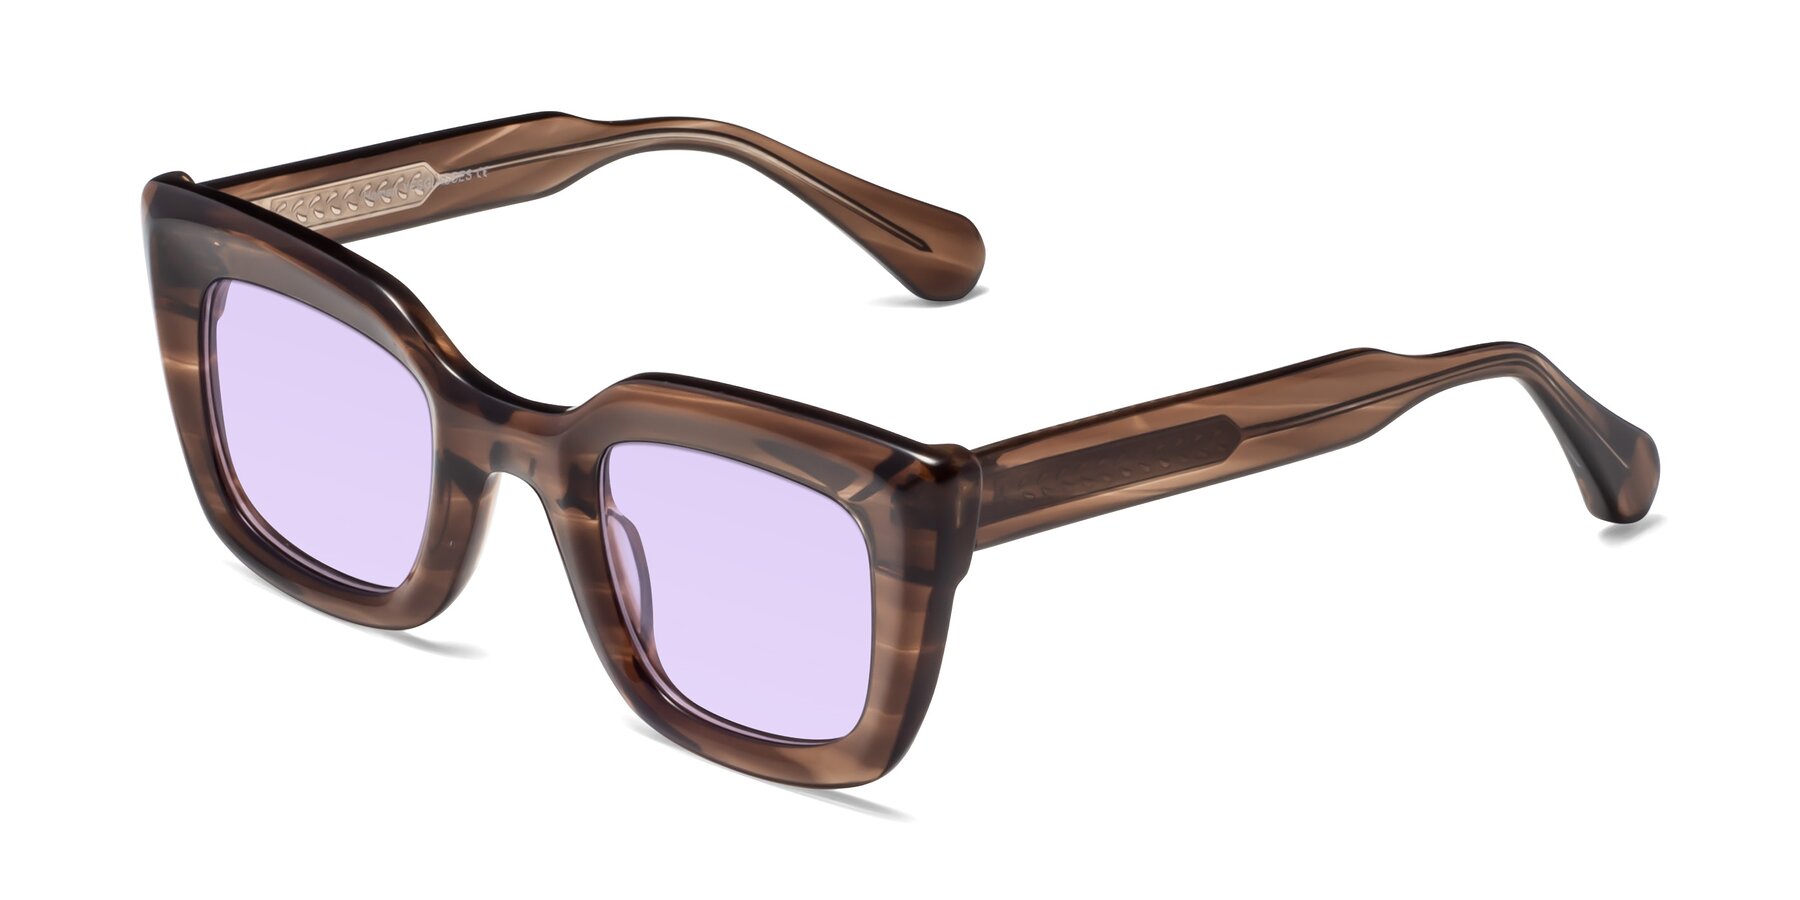 Angle of Homan in Chocolate with Light Purple Tinted Lenses